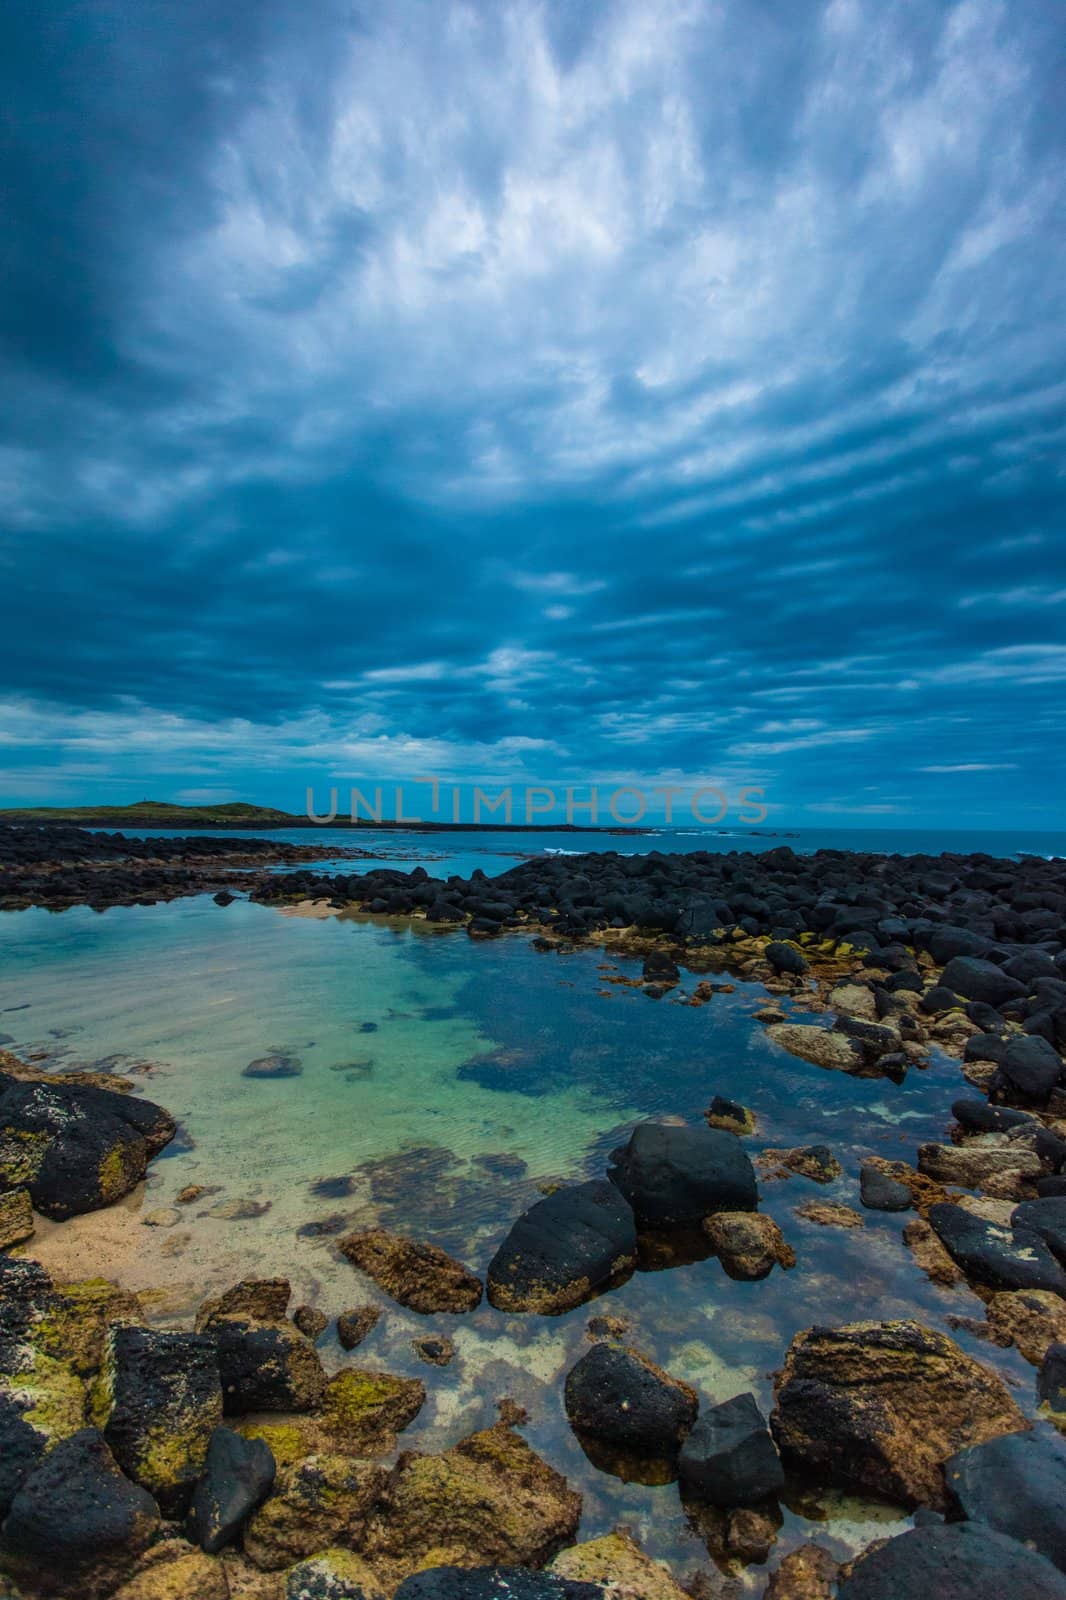 Dusk (Sunset) over black volcanic rocky tidal pool and sky full of rolling cloud in Port Fairy, Victoria, Australia.